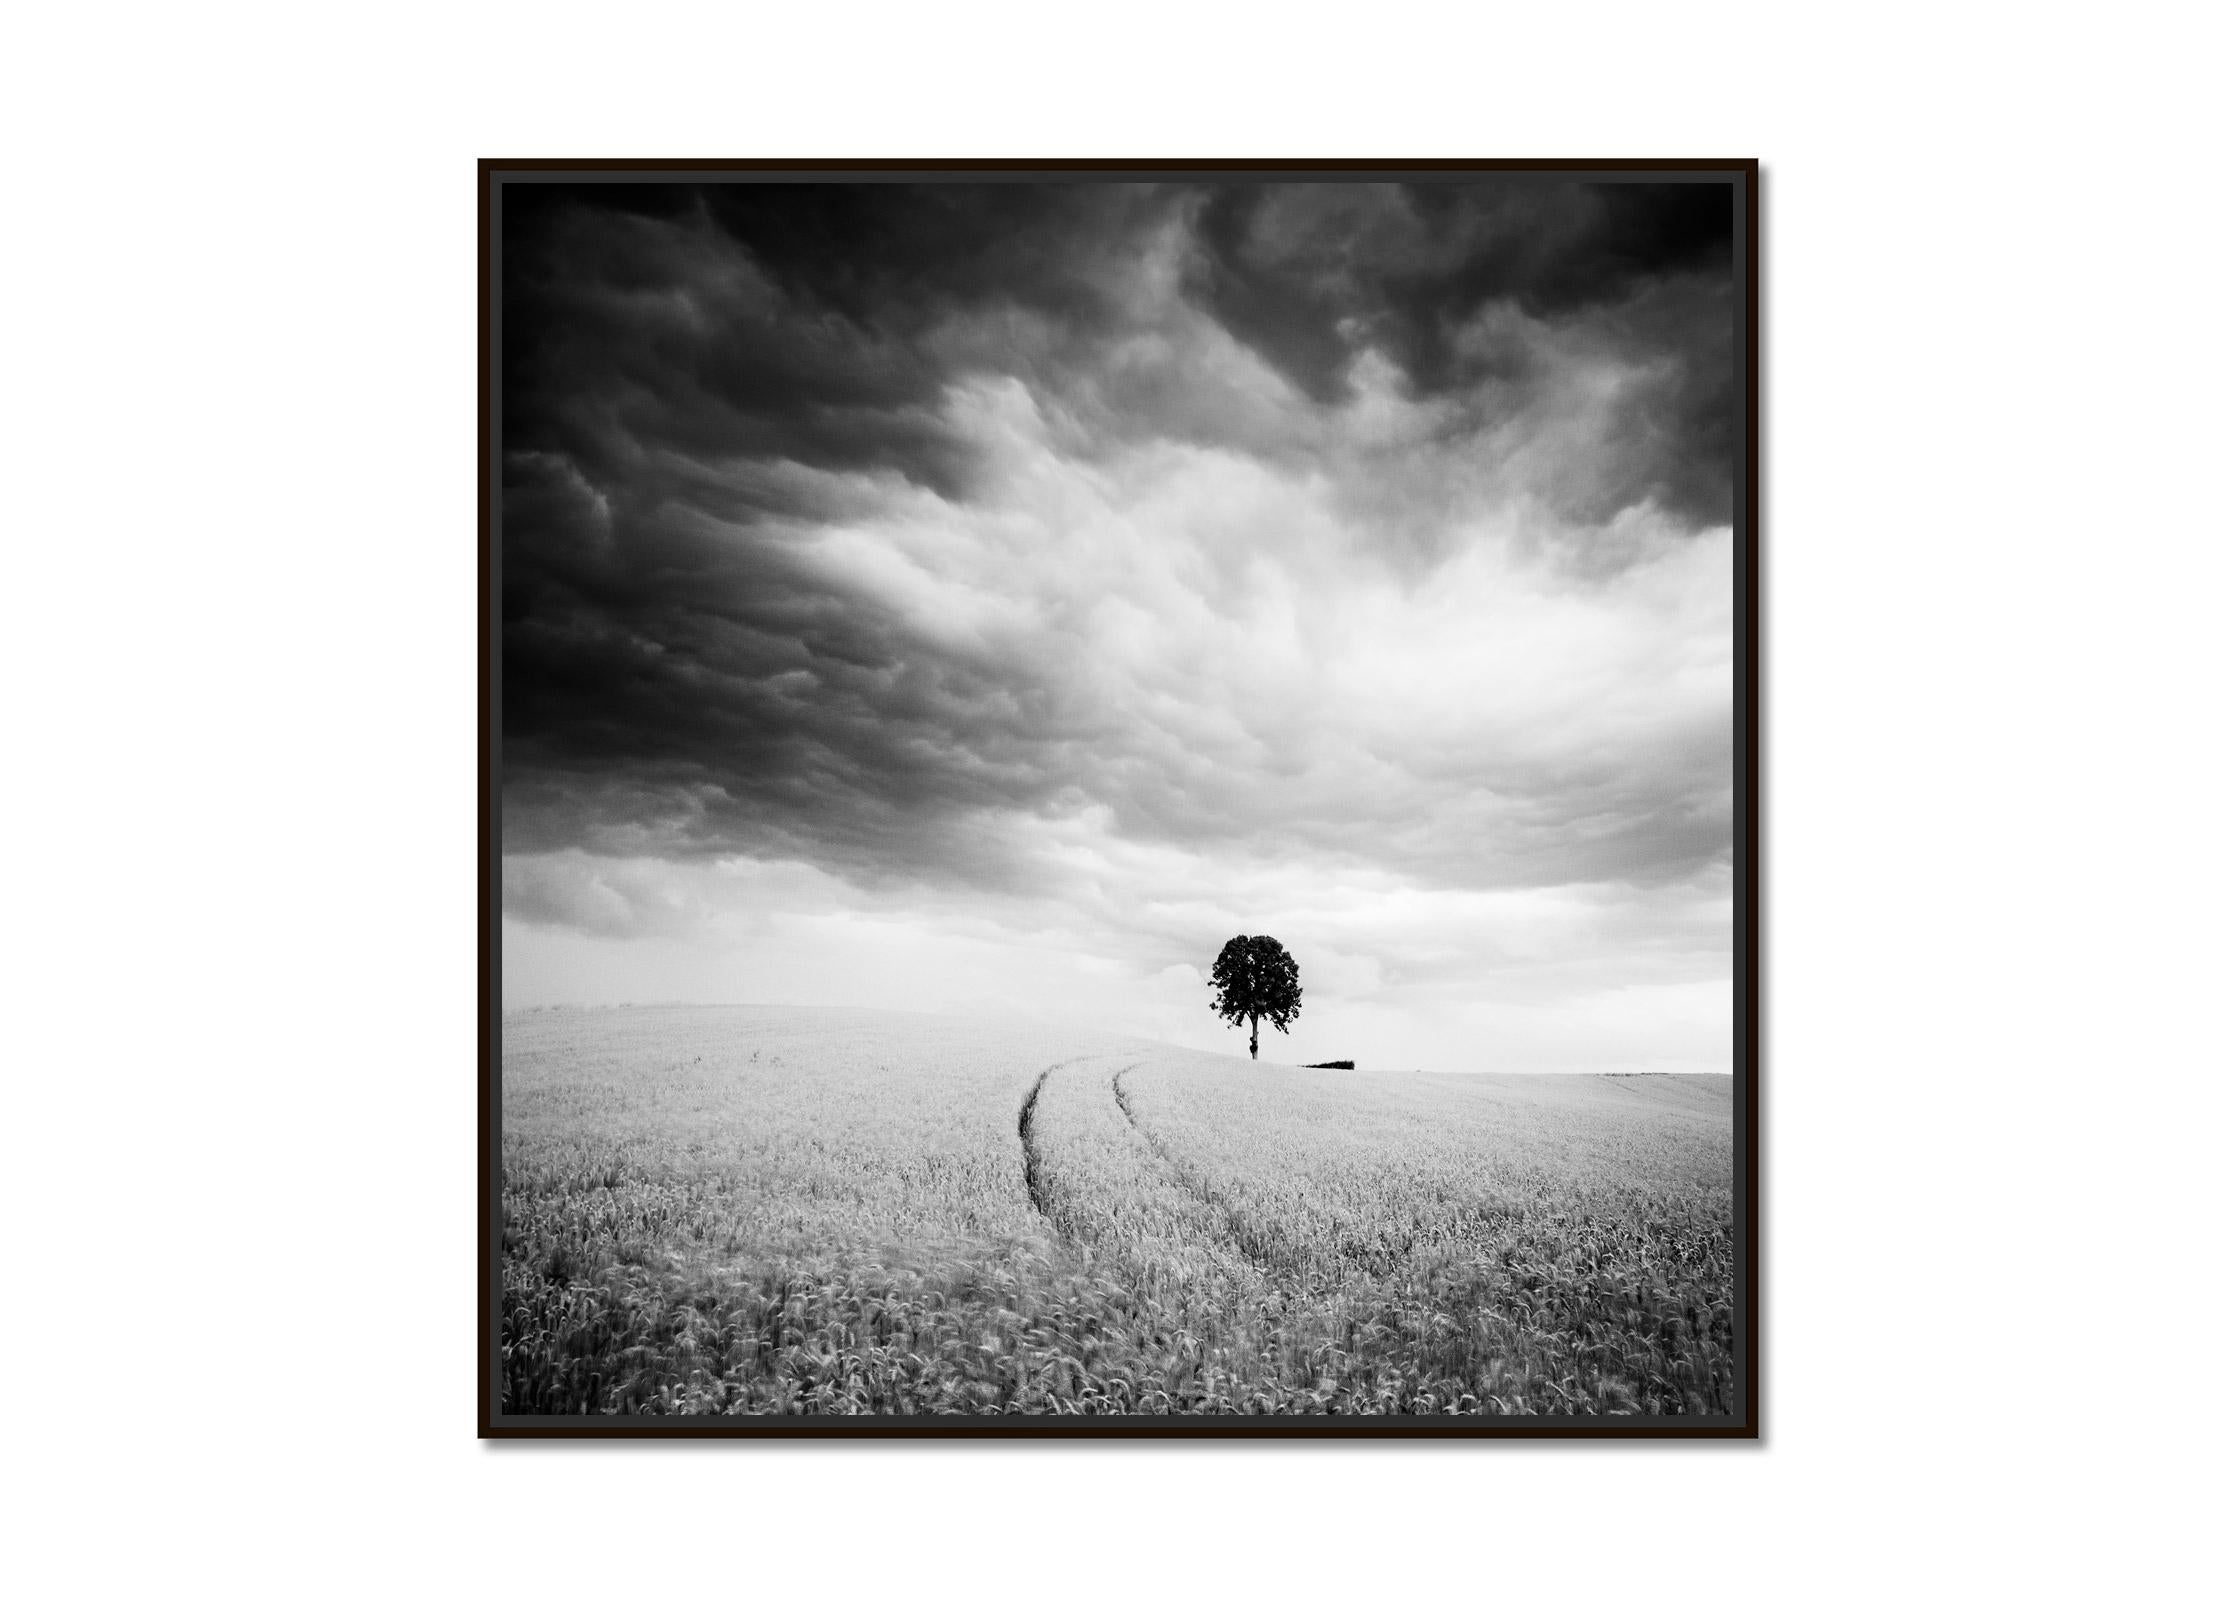 Farmland, single tree, giant clouds, black and white landscape art photography - Photograph by Gerald Berghammer